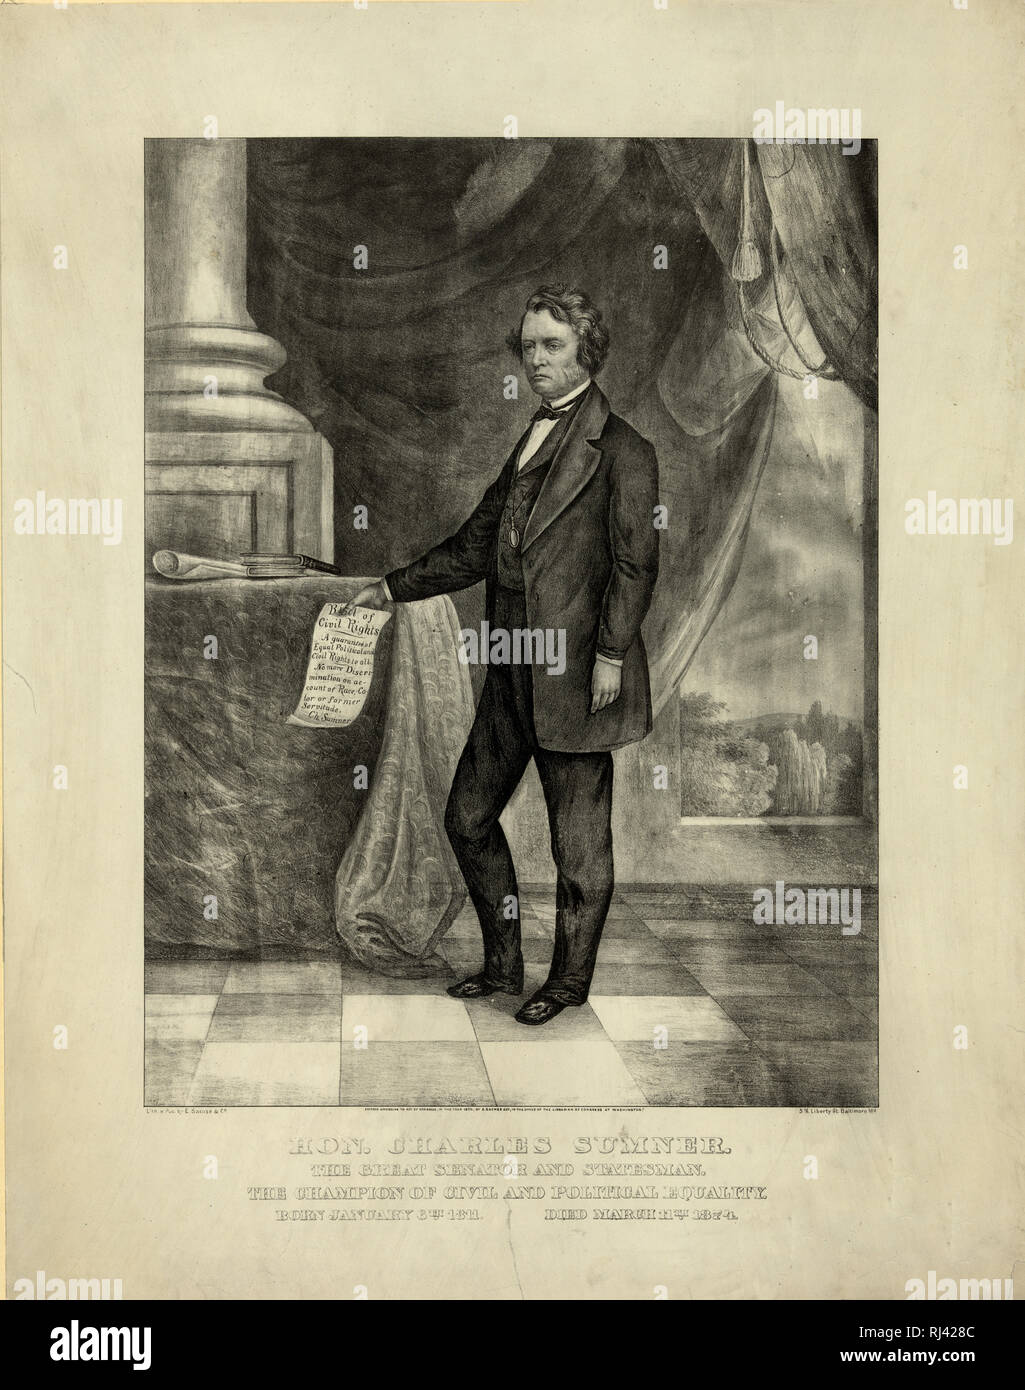 Hon. Charles Sumner. The great senator and statesman. The champion of civil and political equality. Born January 6th 1811. Died March 11th 1874. Stock Photo